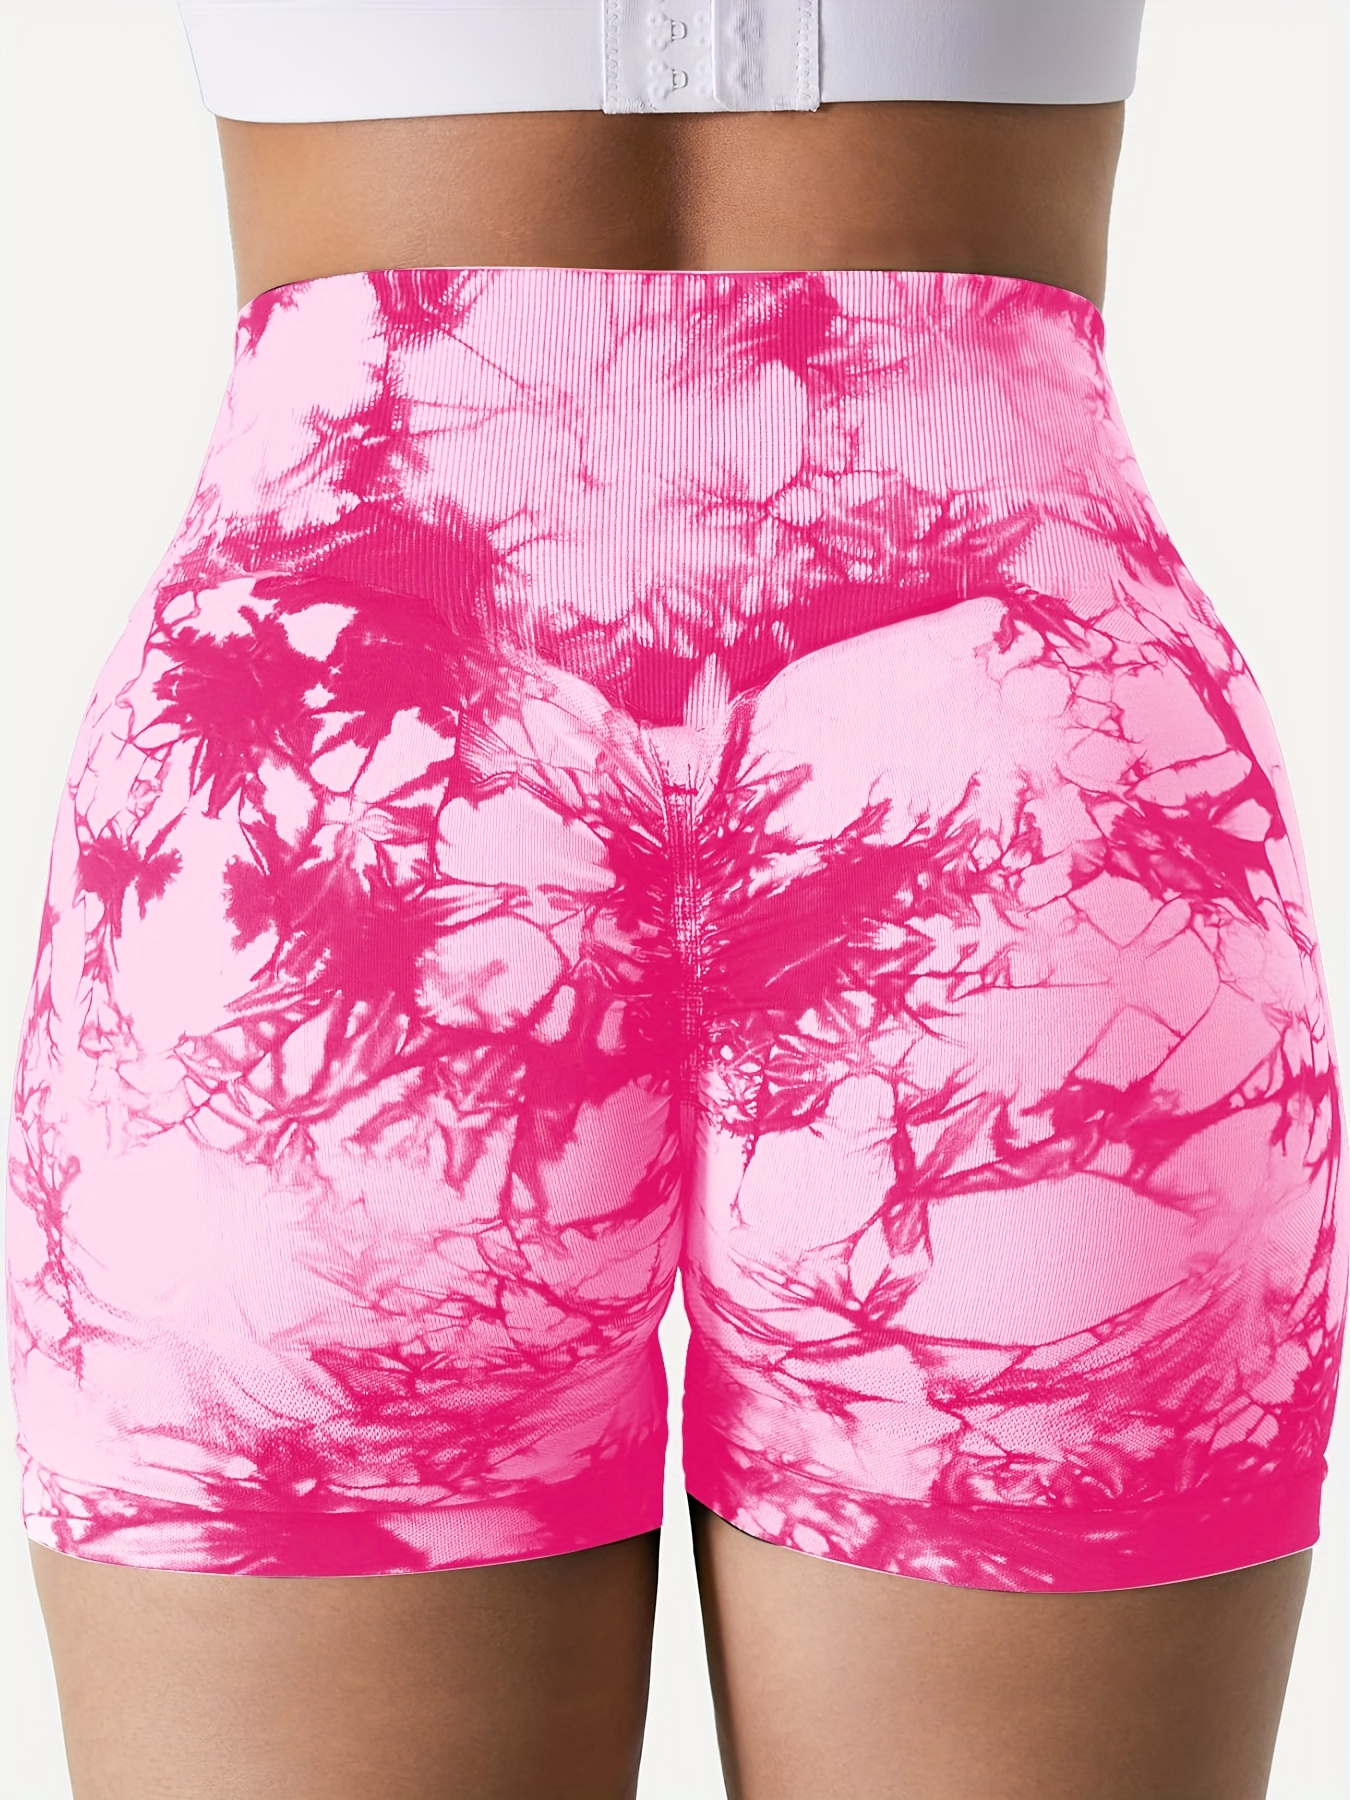 New Design Hot Sexy High Waisted Tie Dye Seamless Shorts and